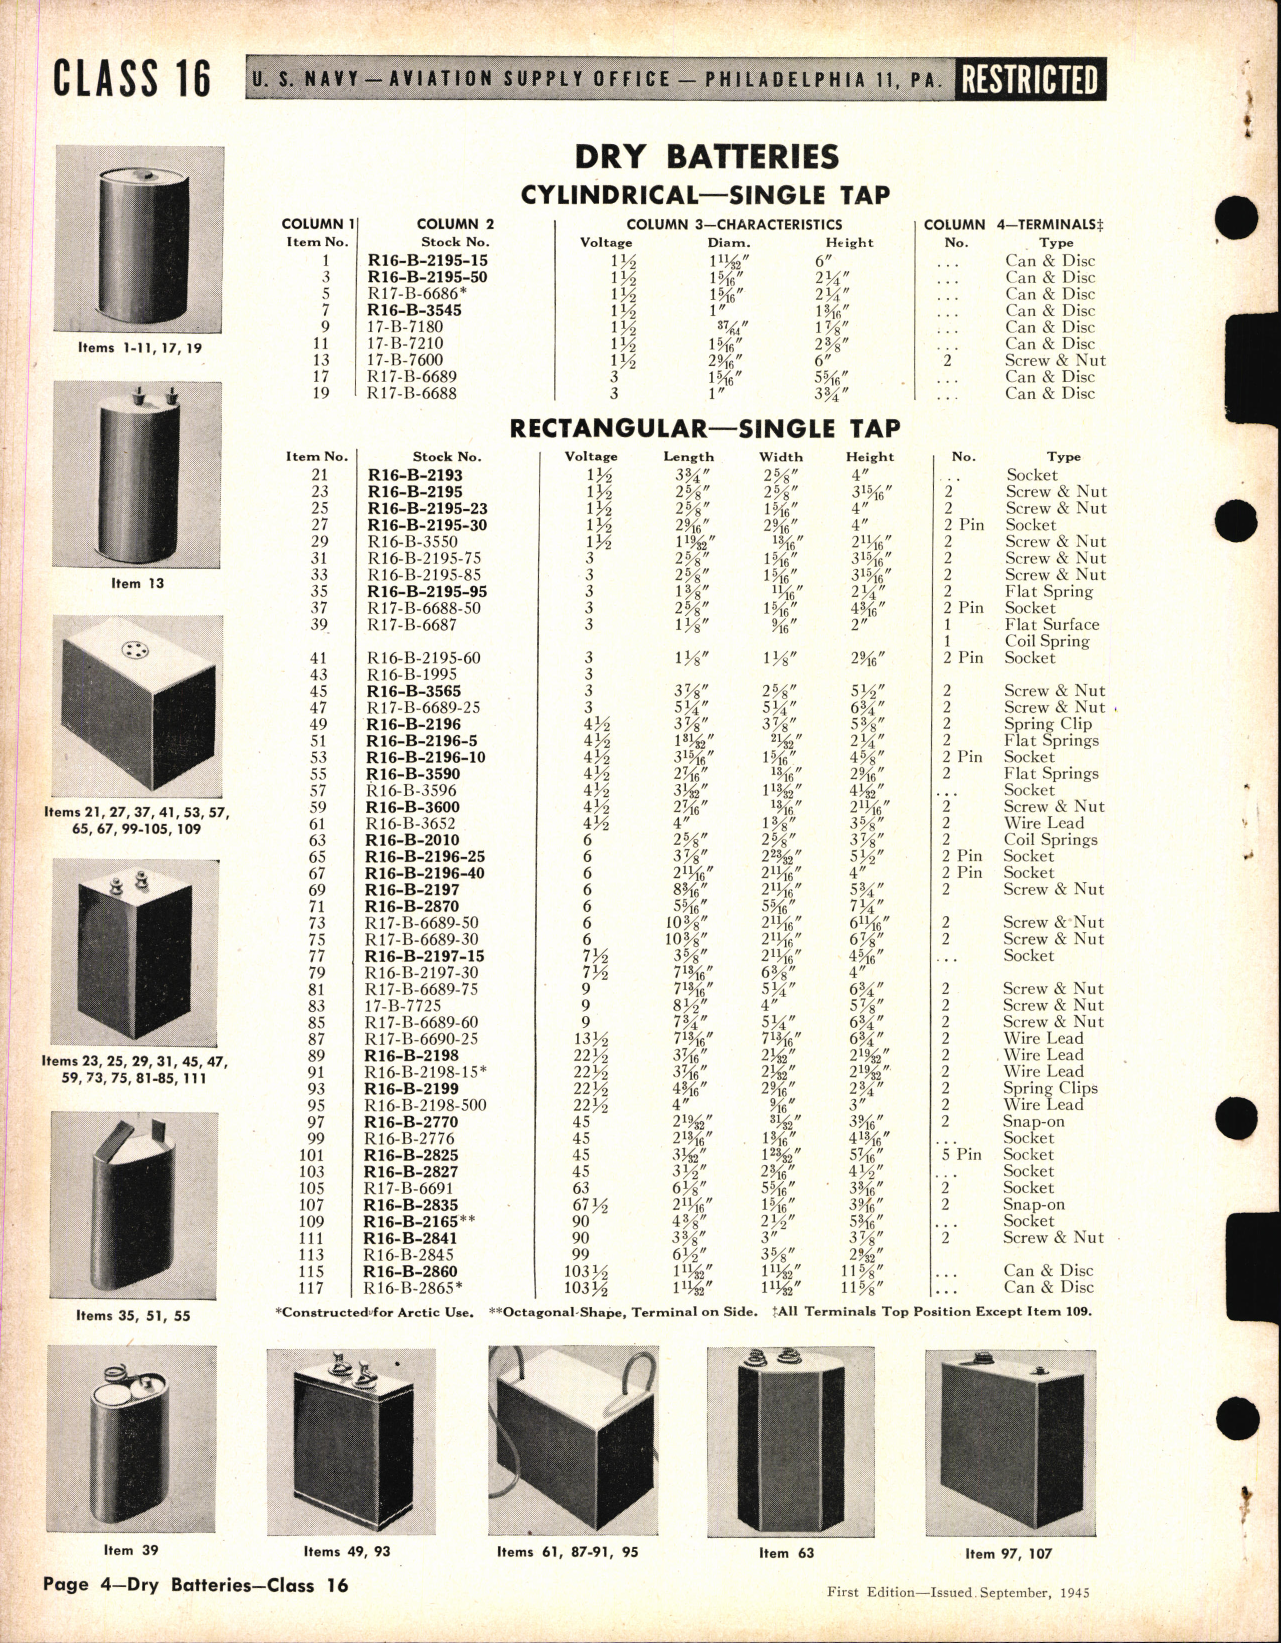 Sample page 4 from AirCorps Library document: Dry Batteries